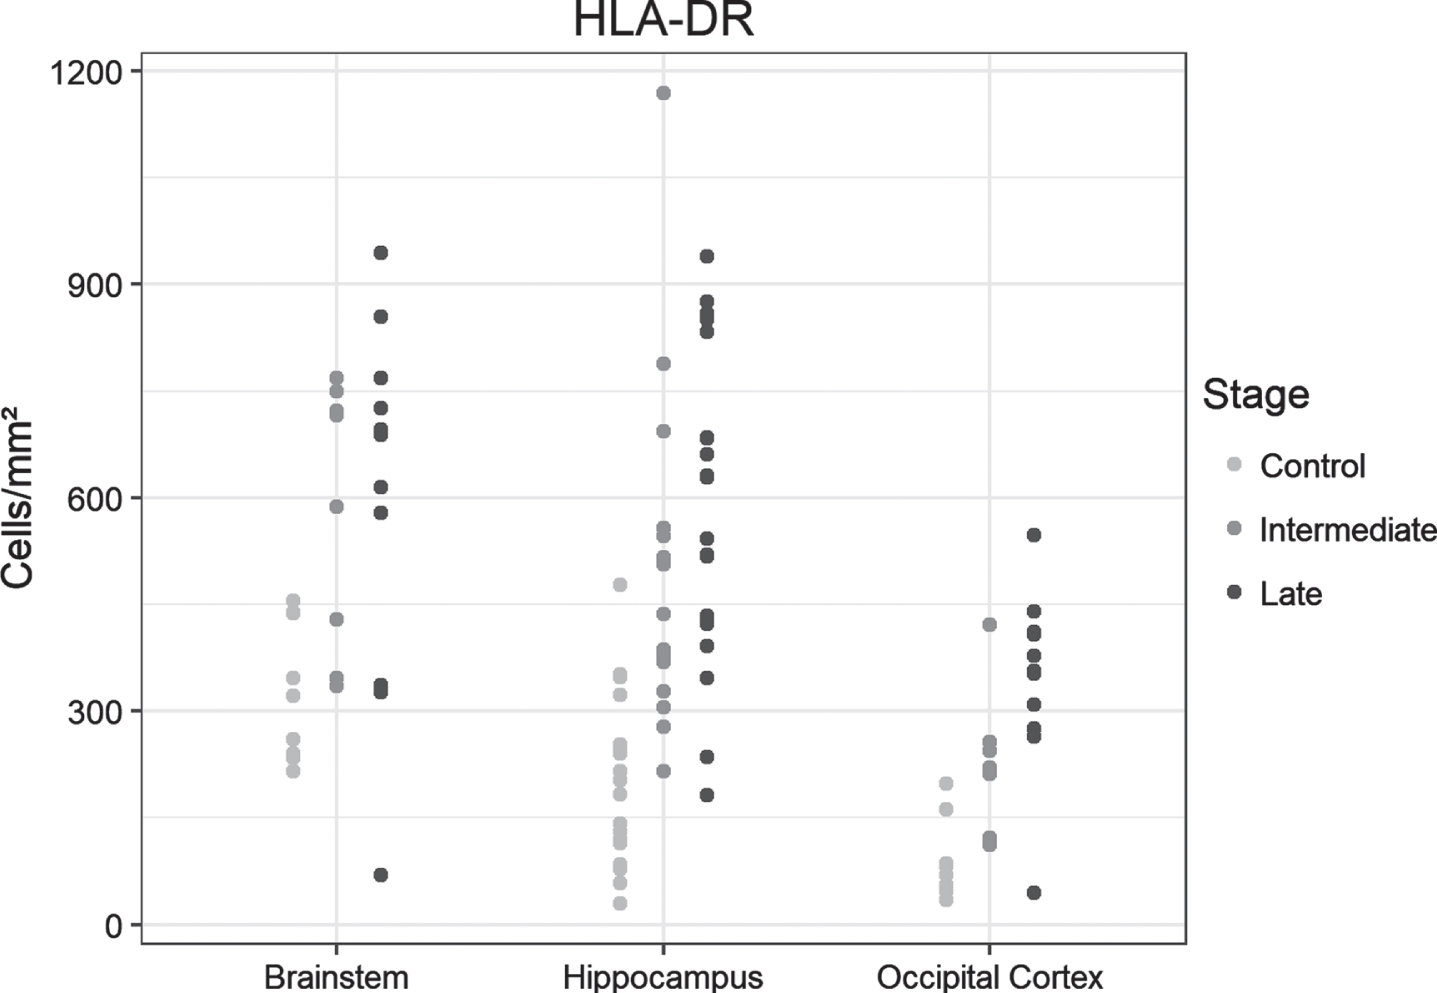 Dot plots presentation of HLA-DR-positive cells in the analyzed regions of control, intermediate and late AD groups.